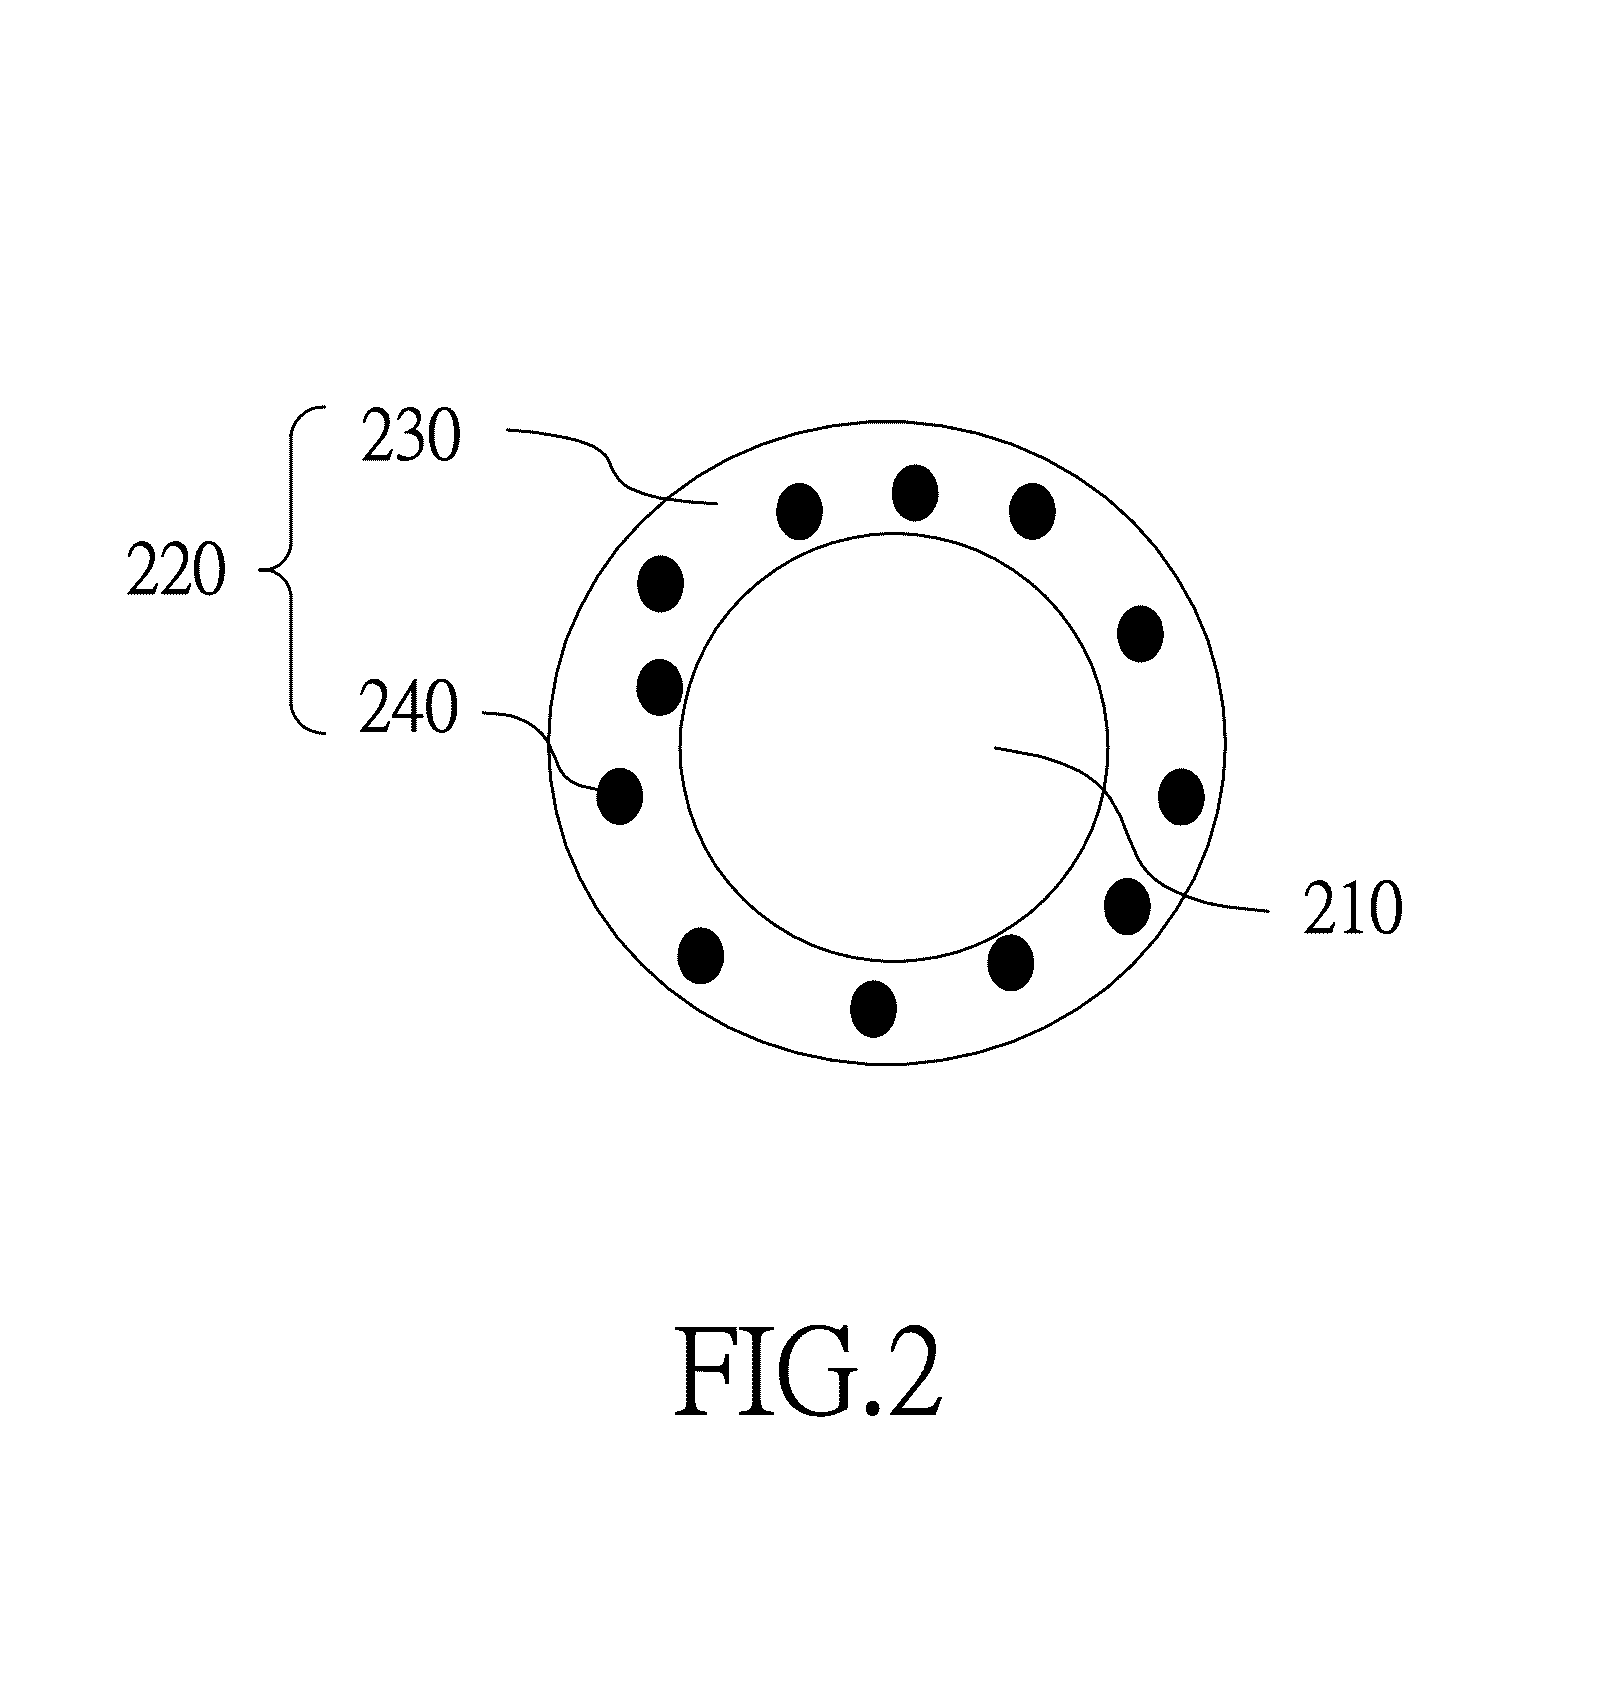 Process for preparing phase change microcapsule having thermally conductive shell